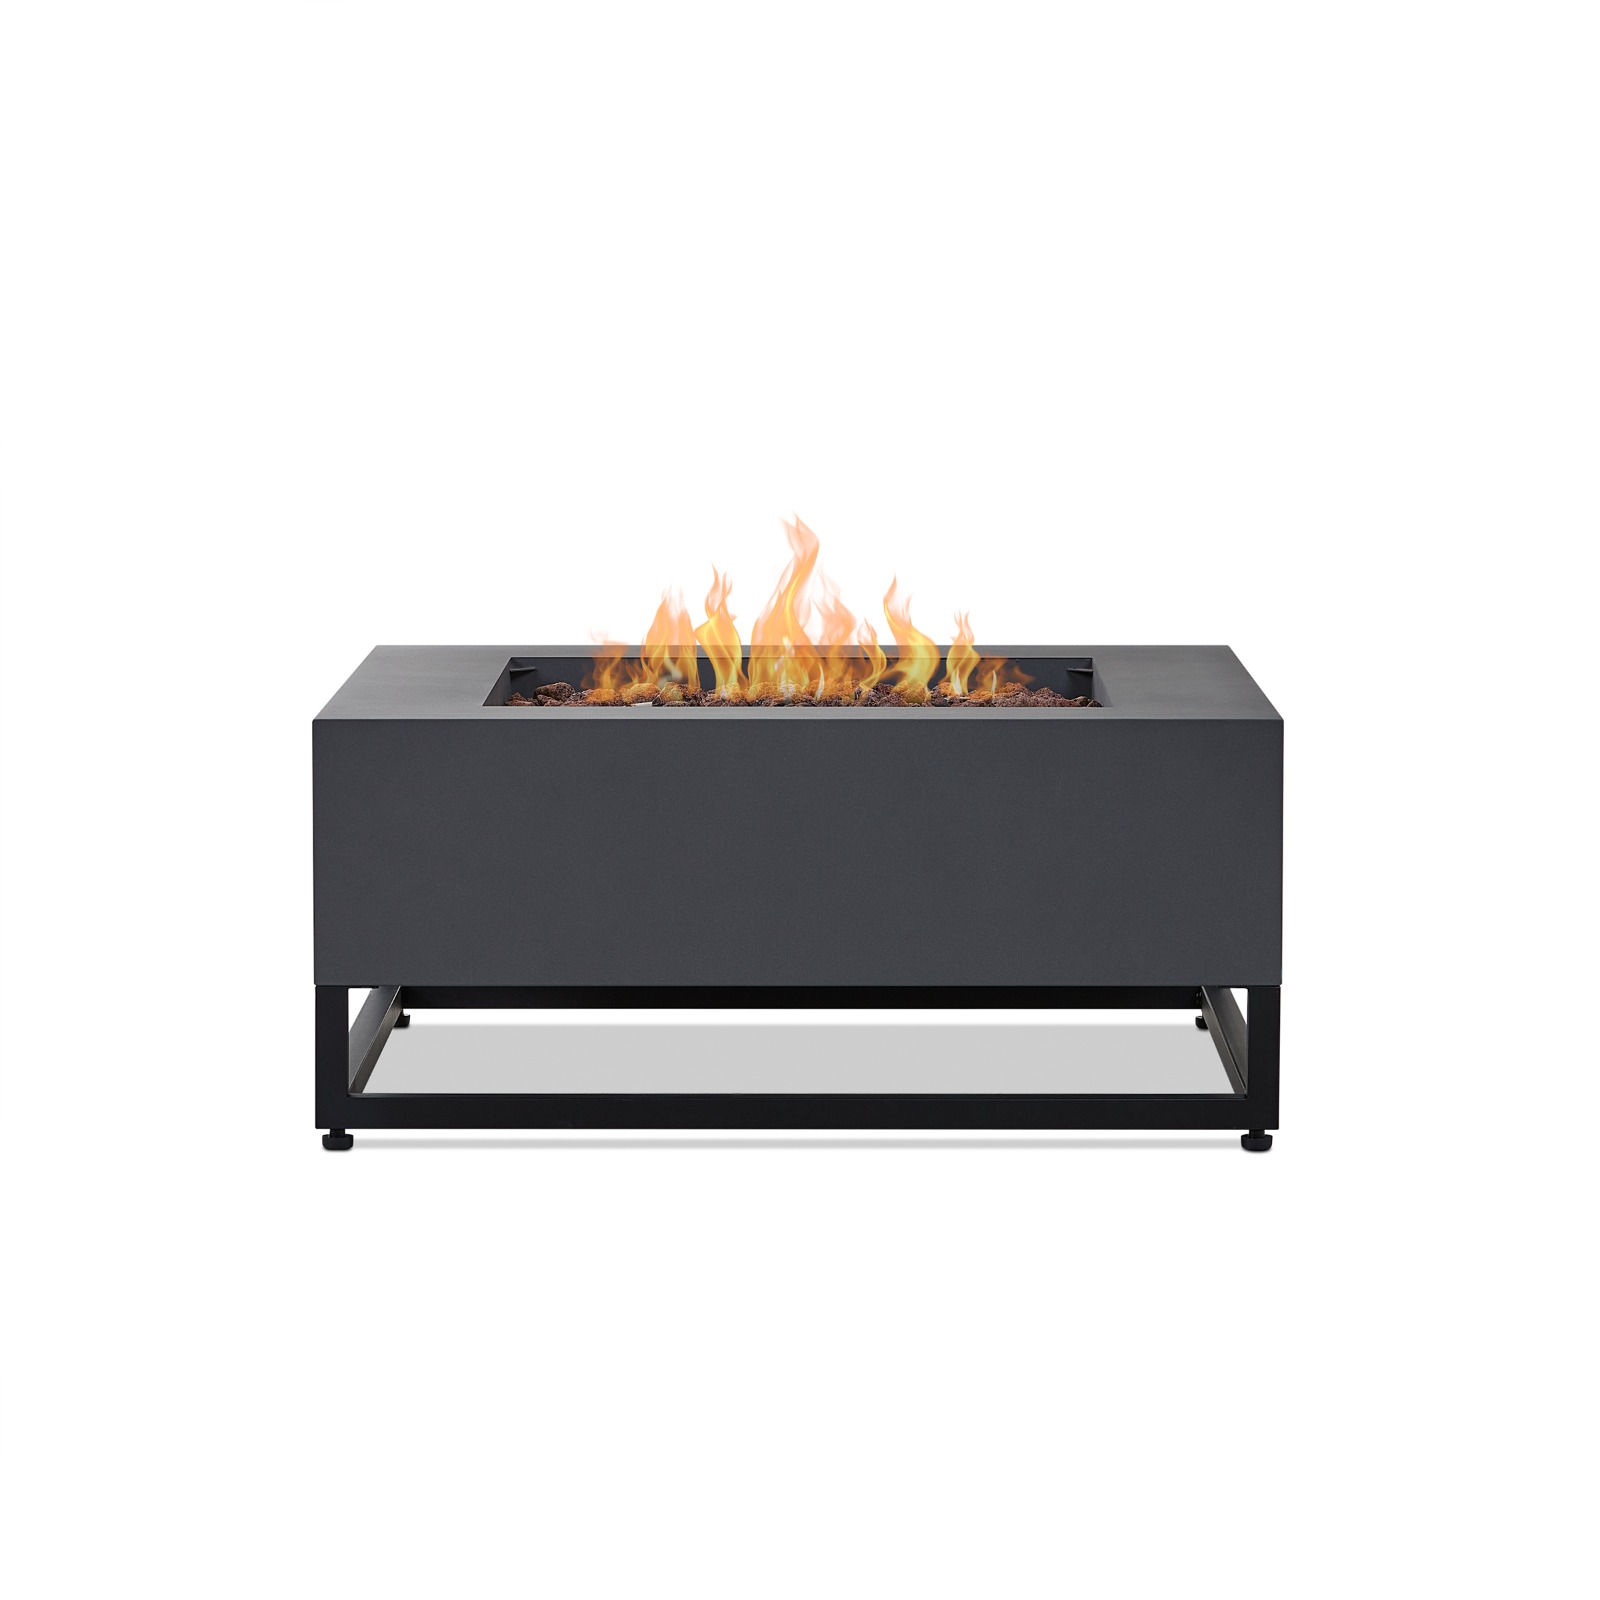 Blake Square Propane Fire Pit Outdoor Fireplace Fire Table for Backyard or Patio